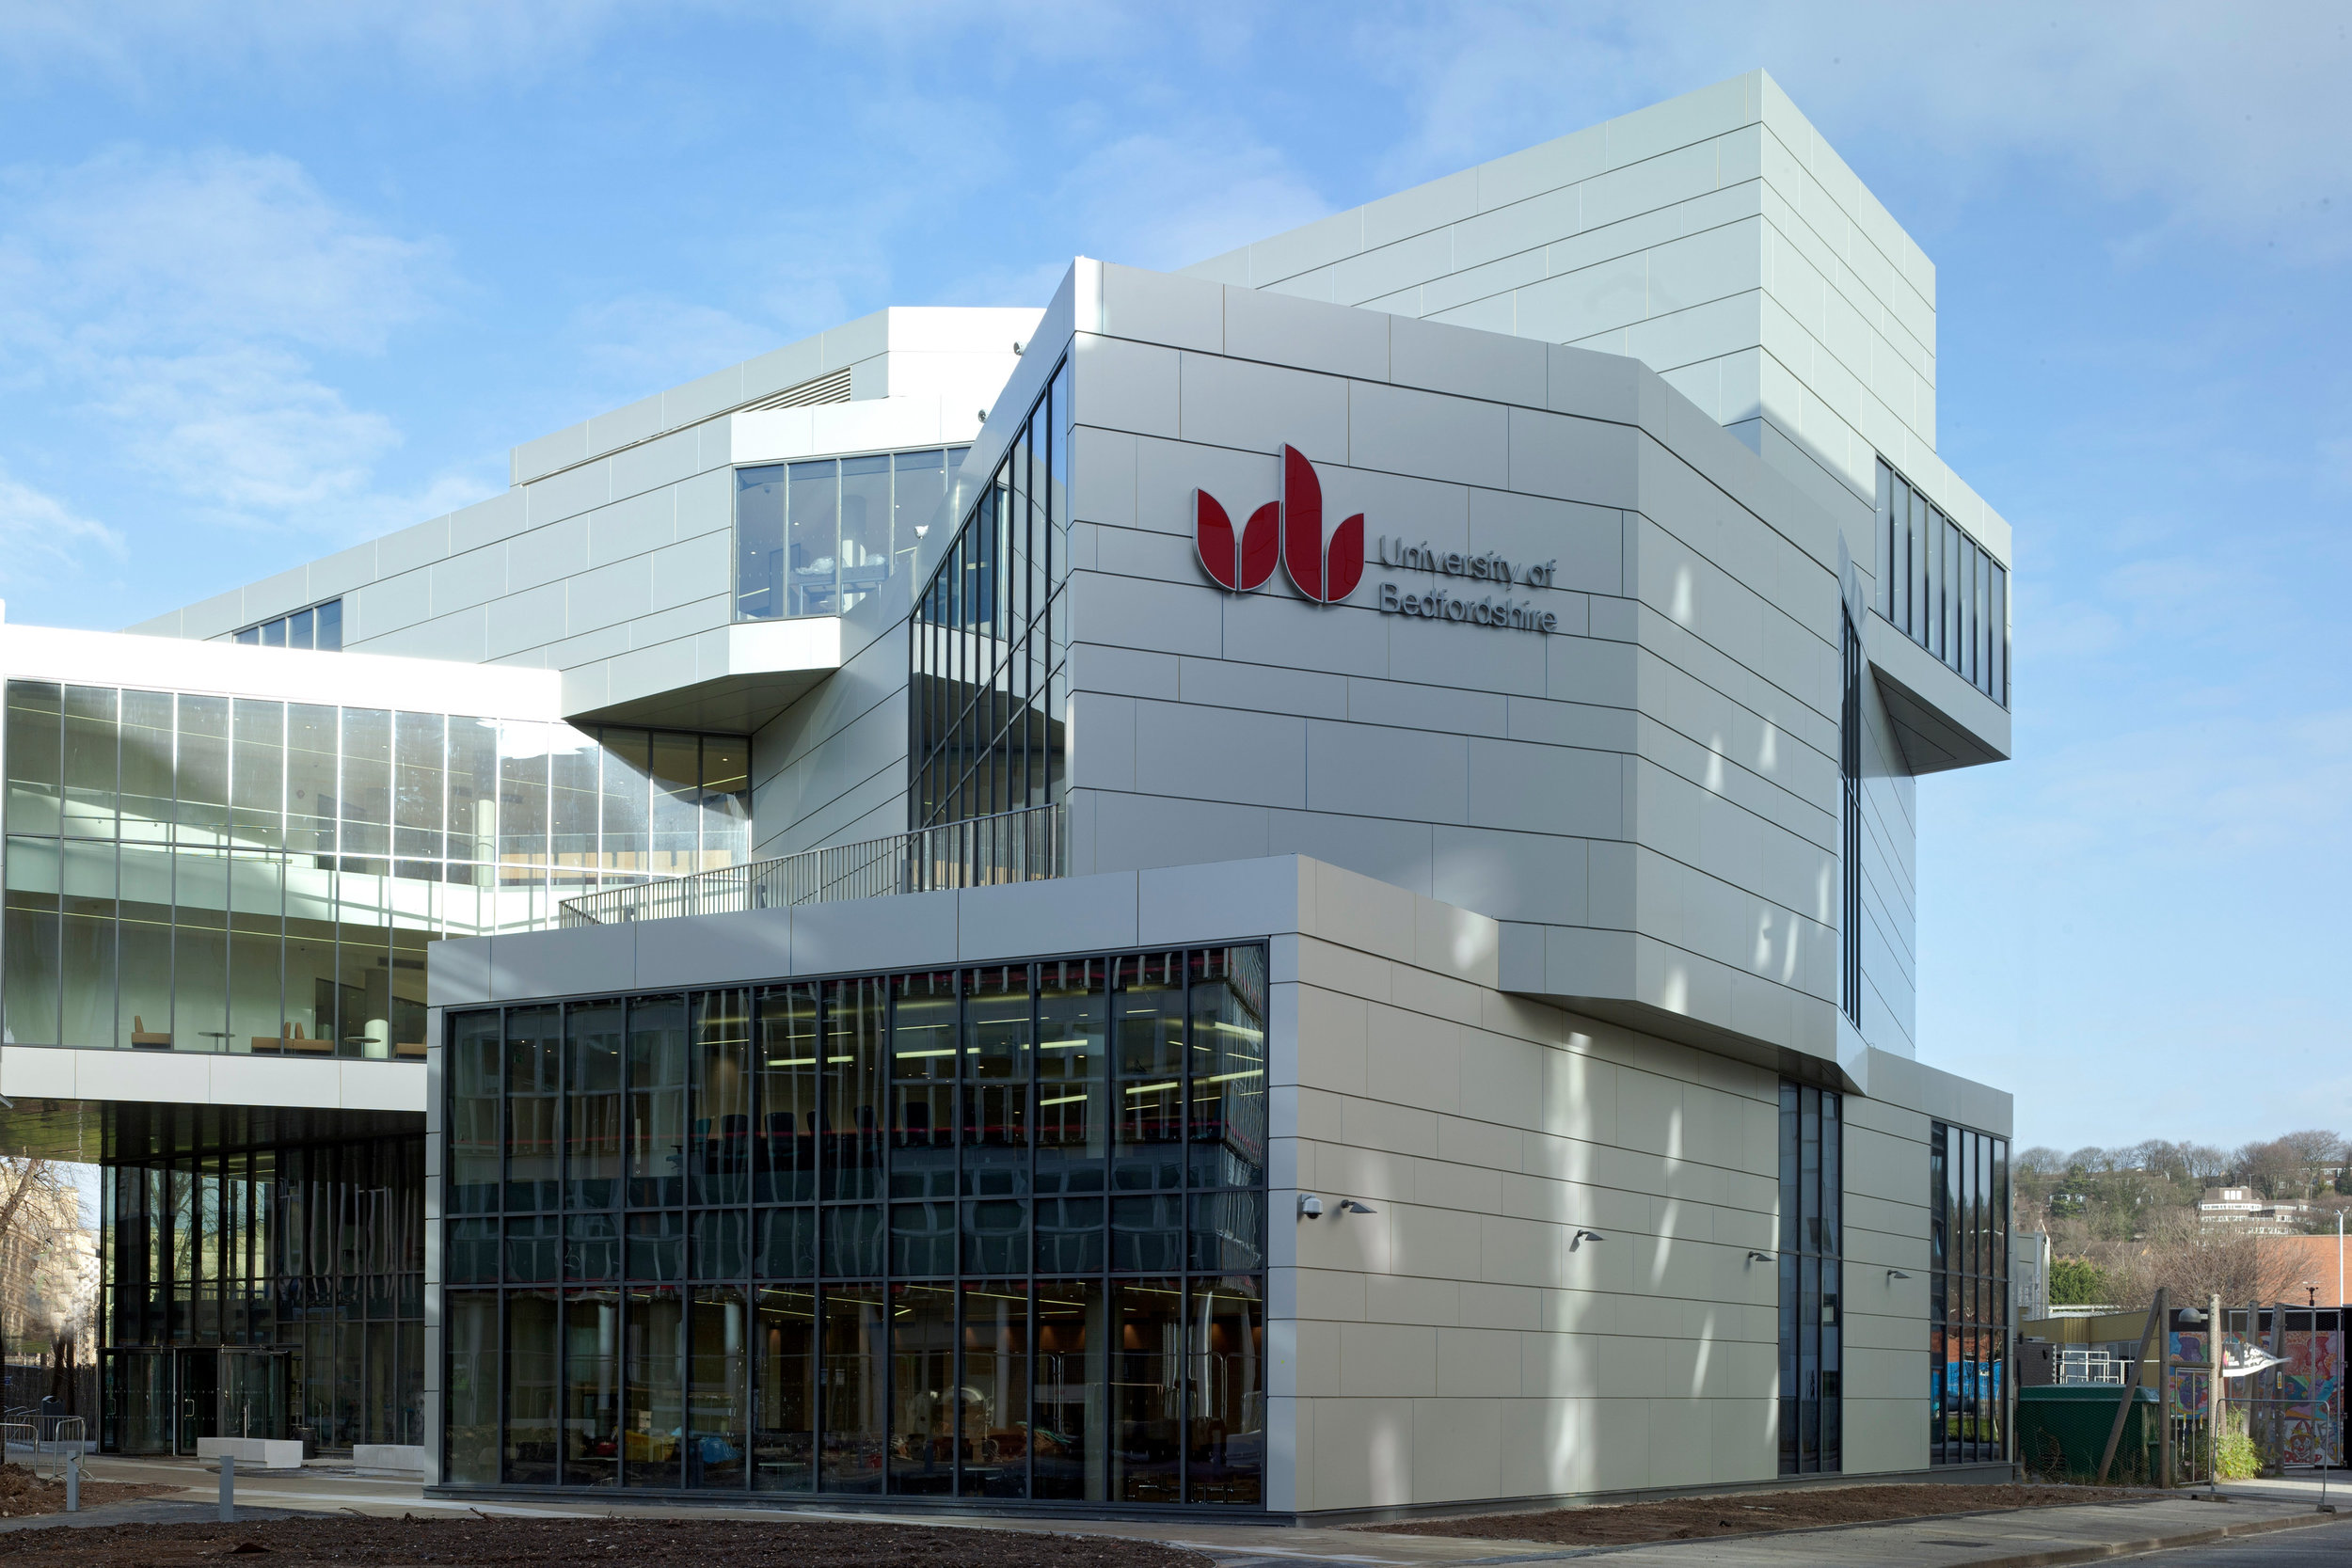 On-spot admission with University of Bedfordshire University